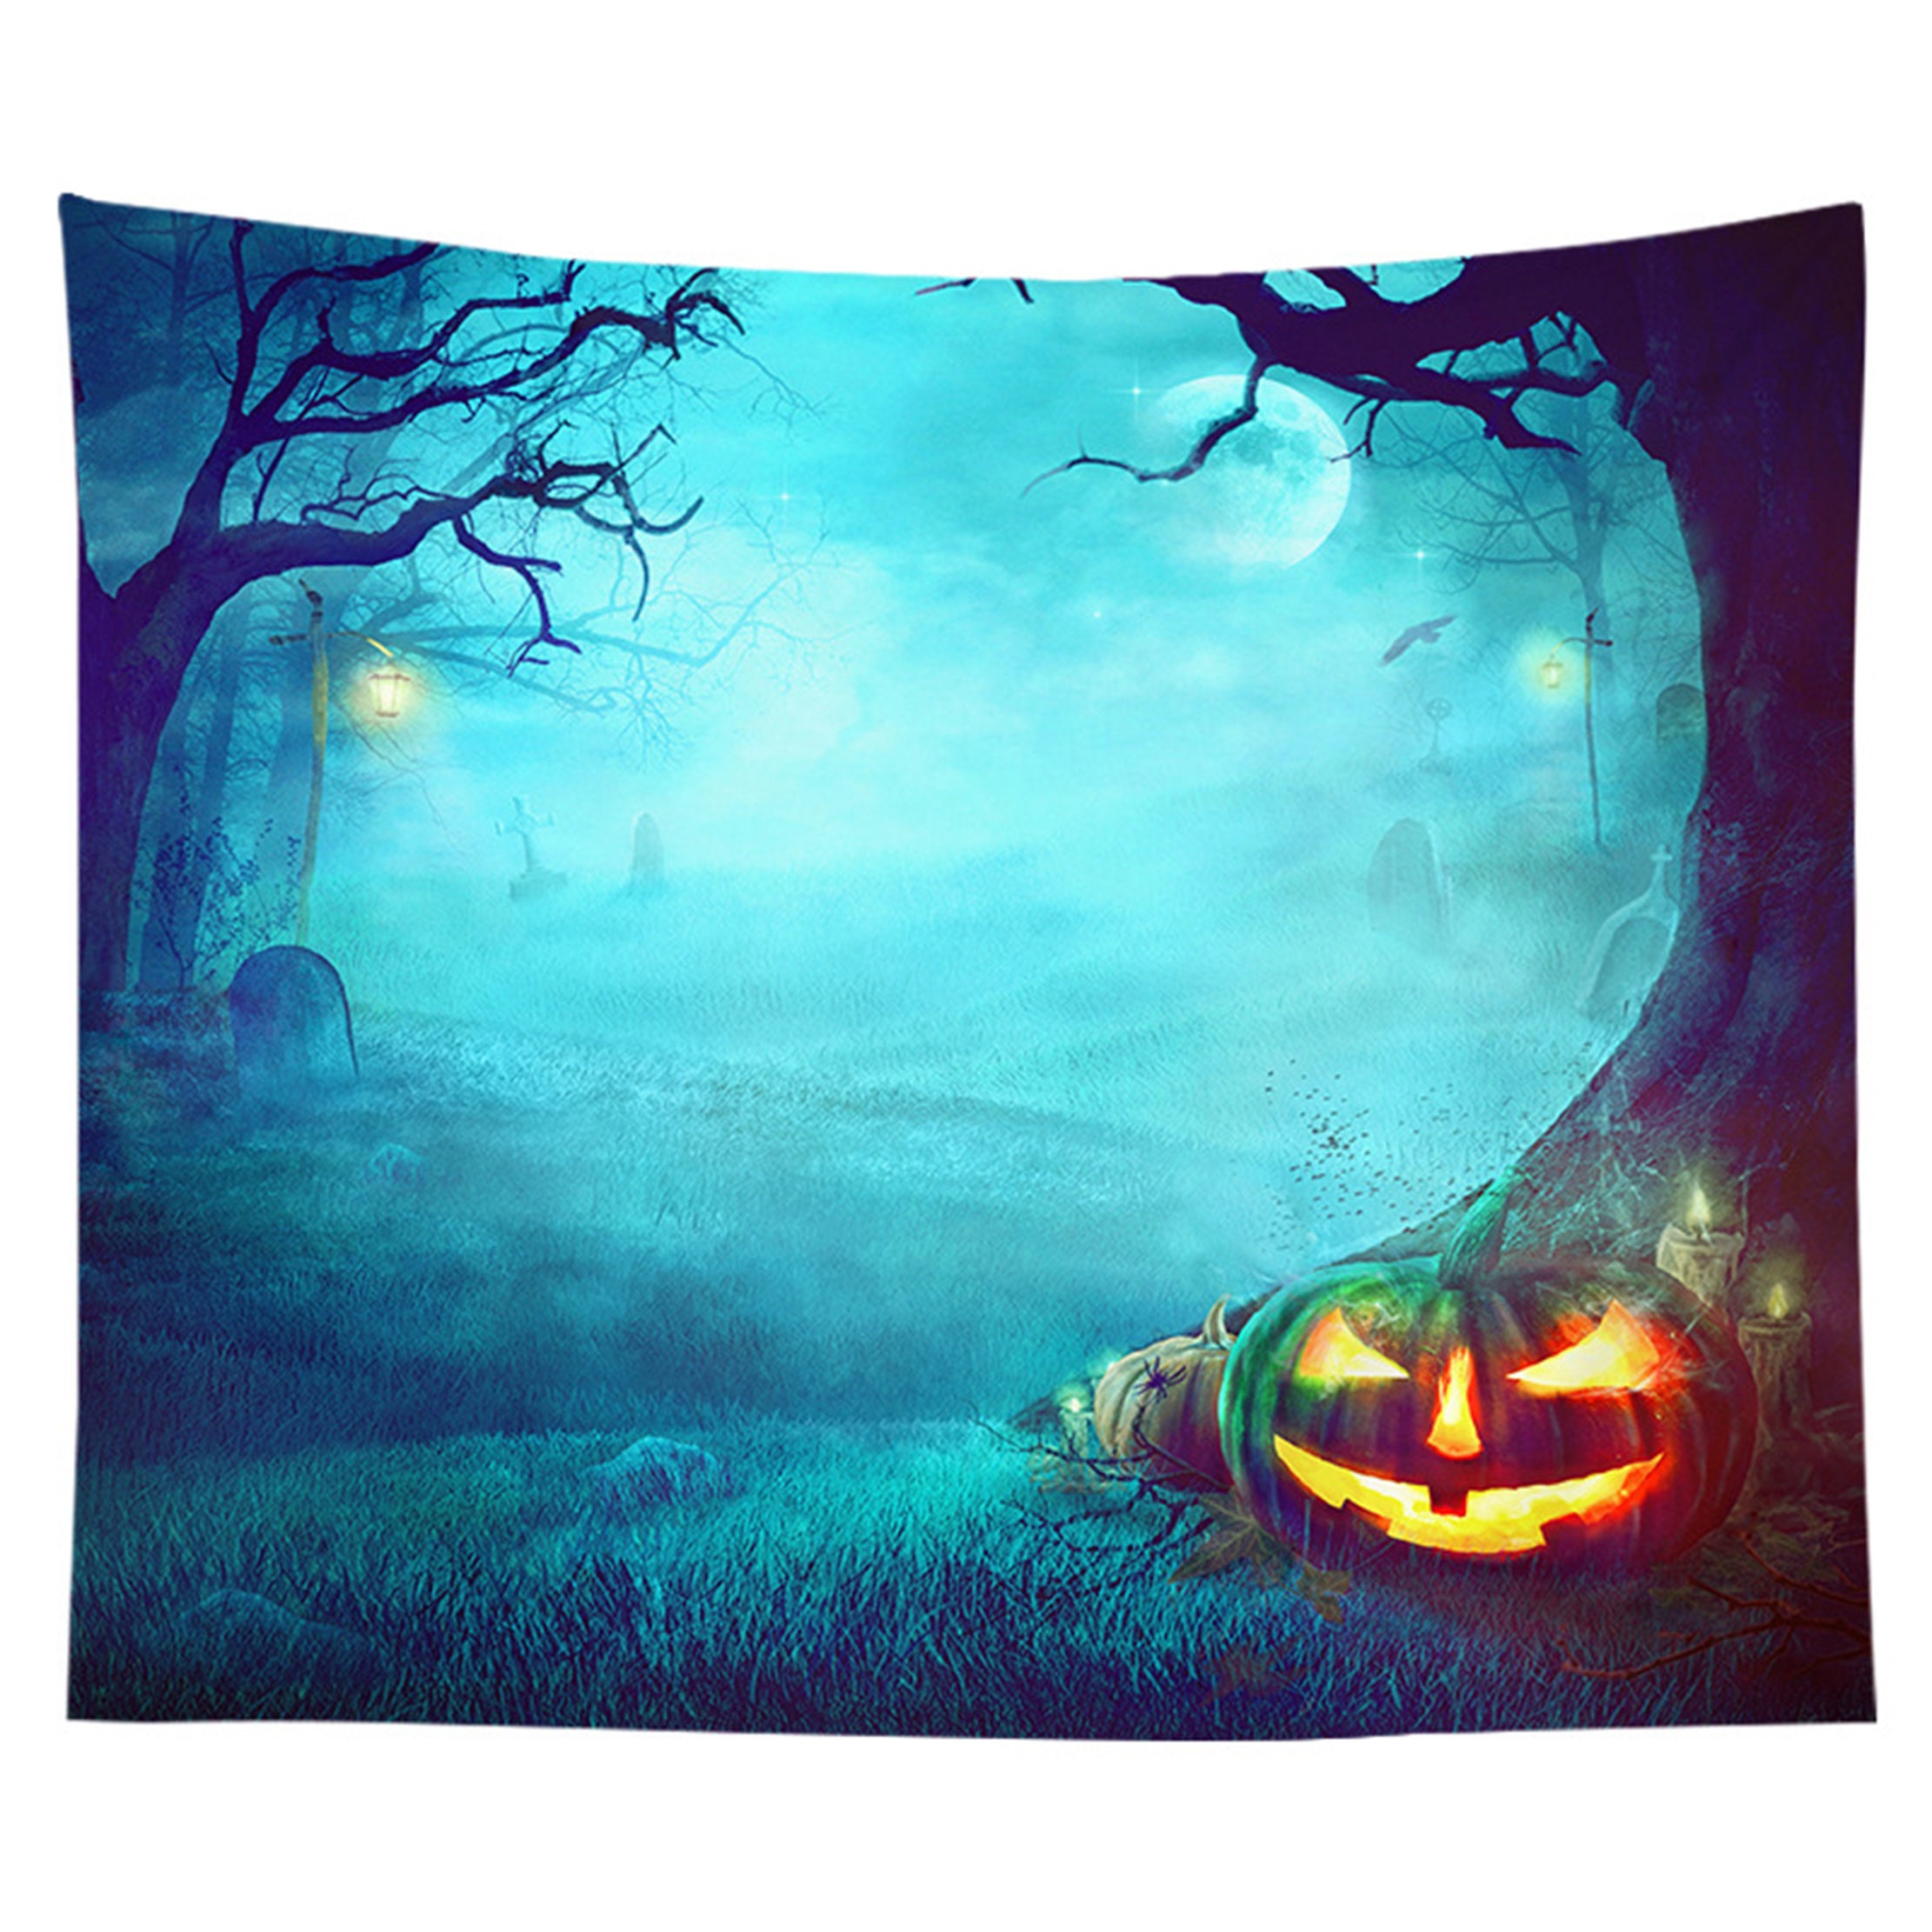 Discover Pumpkin Halloween Tapestry,Halloween Wall Tapestry,Wall Hanging for Halloween,Large Halloween Wall Art,Pumpkin Home Decor,Halloween Gift